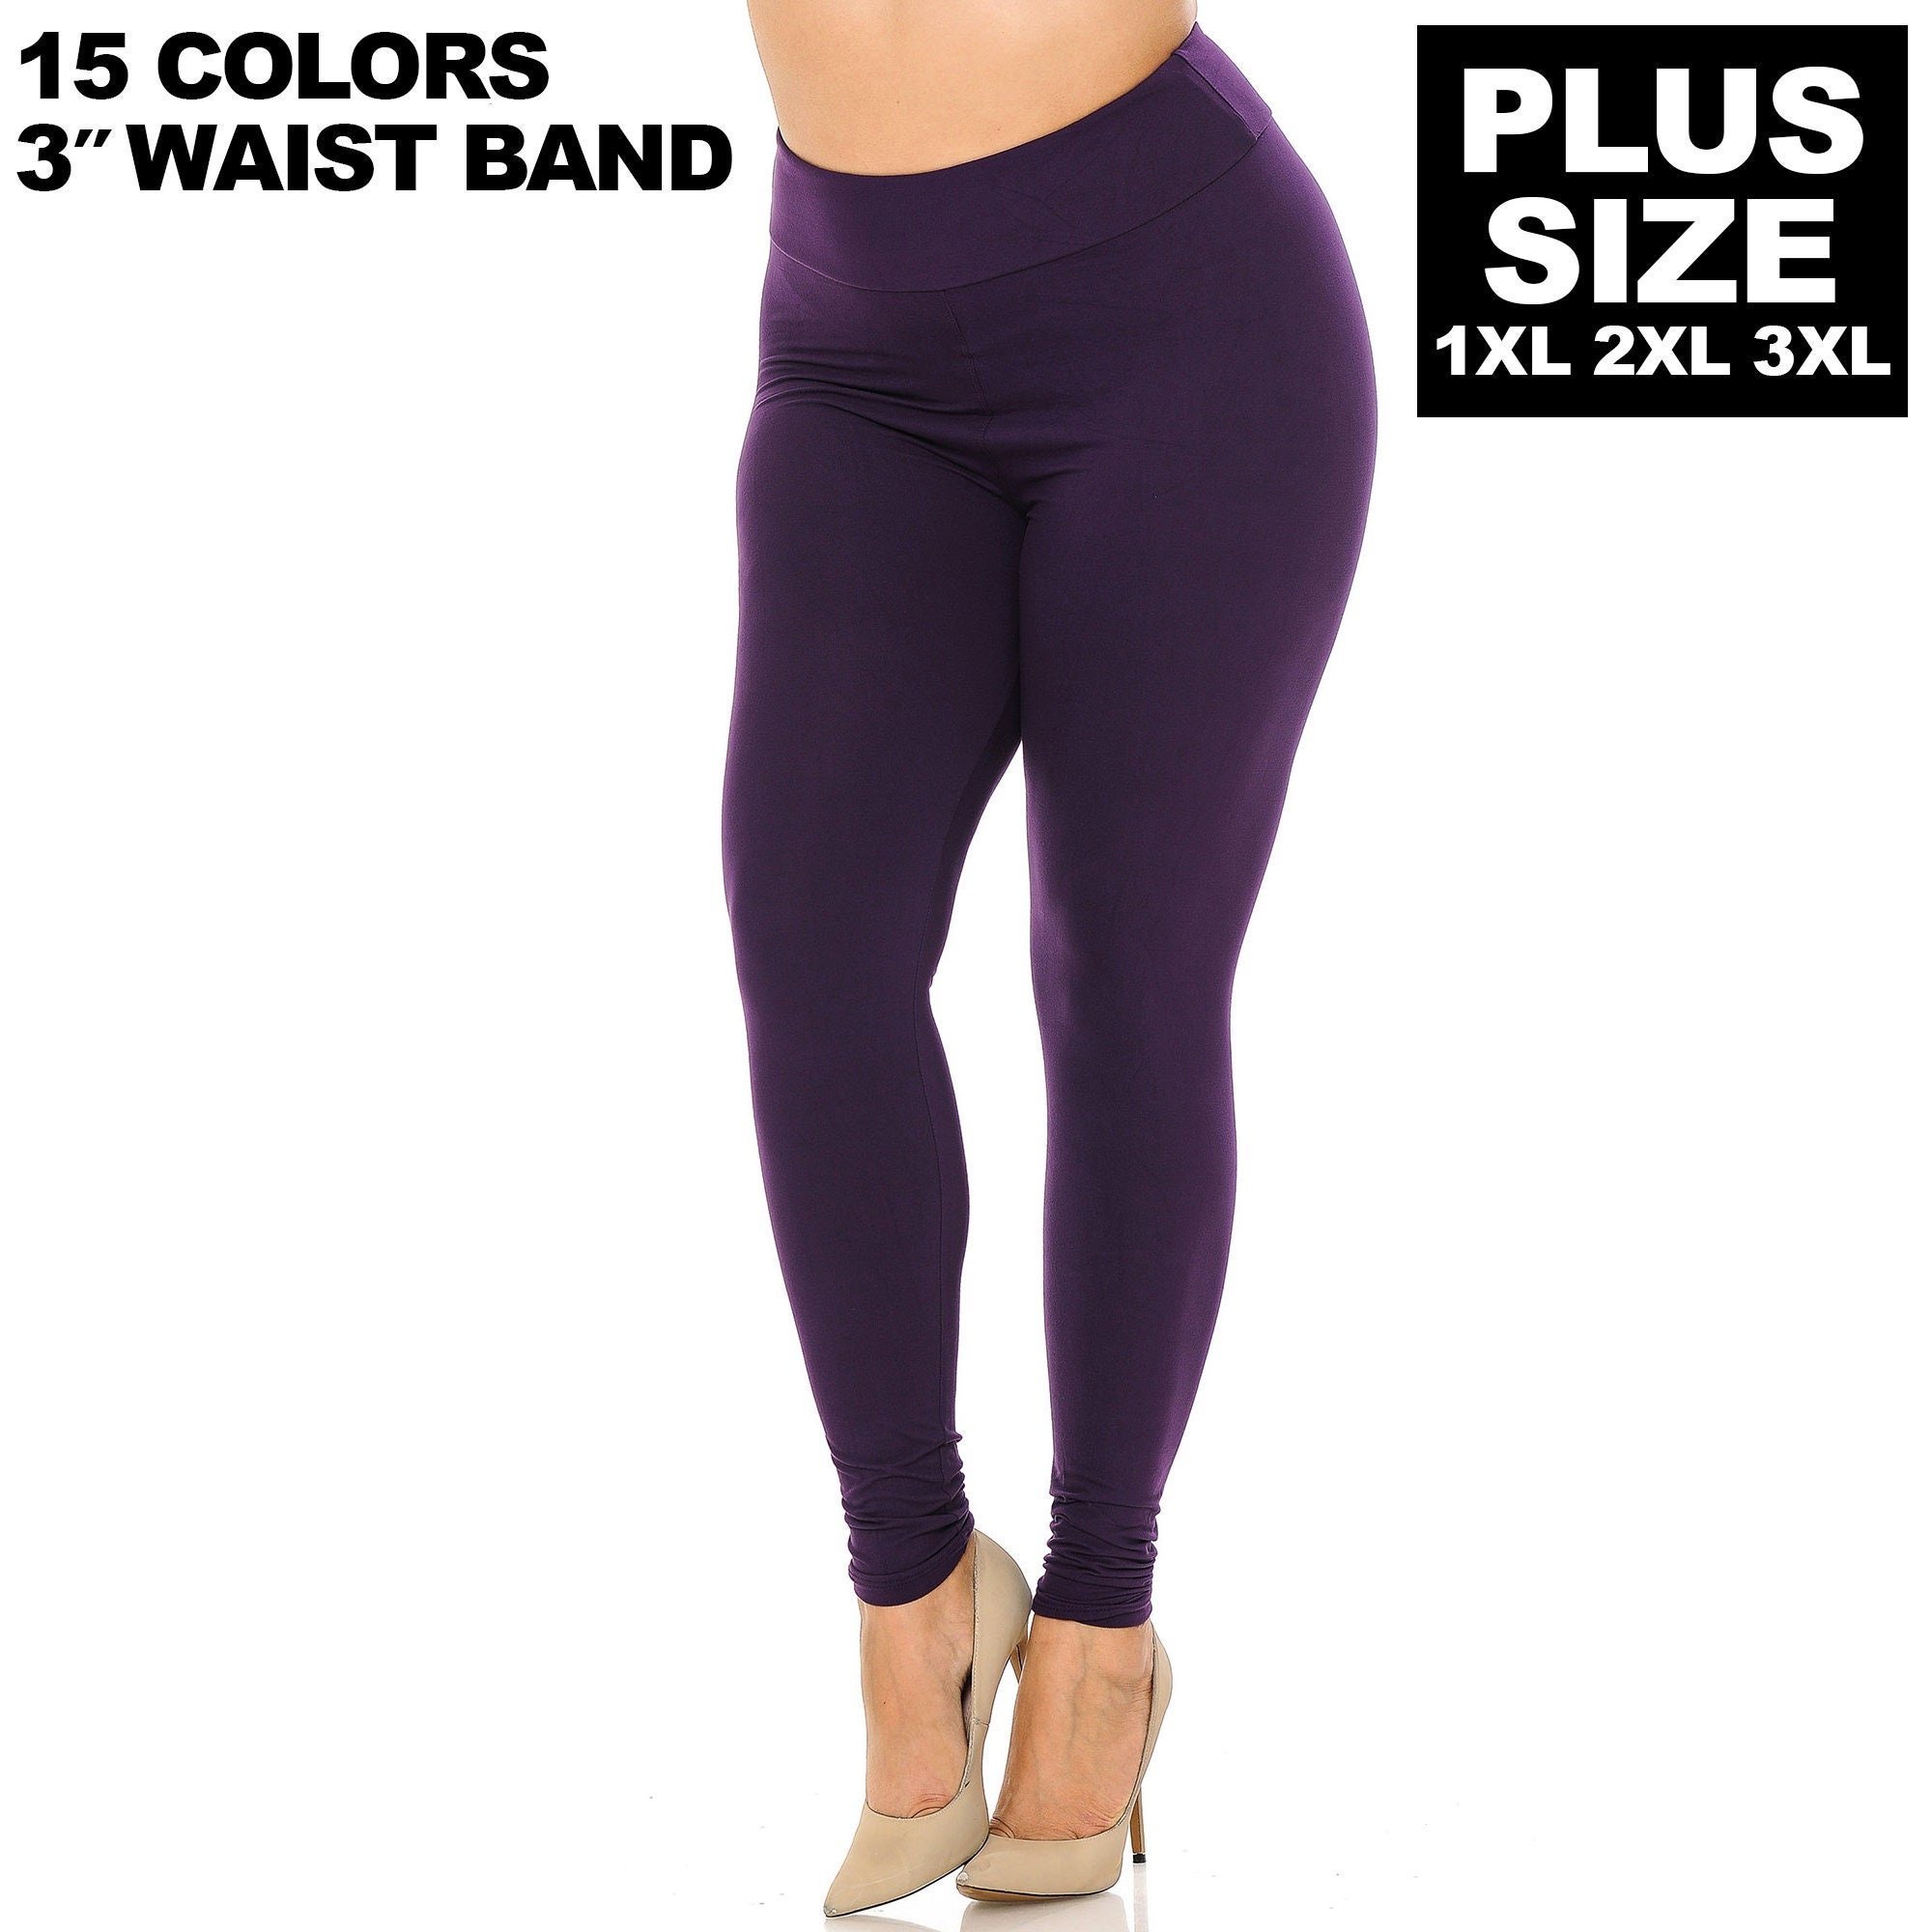 Plus Size Buttery Smooth Solid Basic High Waisted Leggings by EEVEE, 3 Inch  Waist Band, 1XL, 2XL, 3XL 12 Colors FREE SHIPPING 